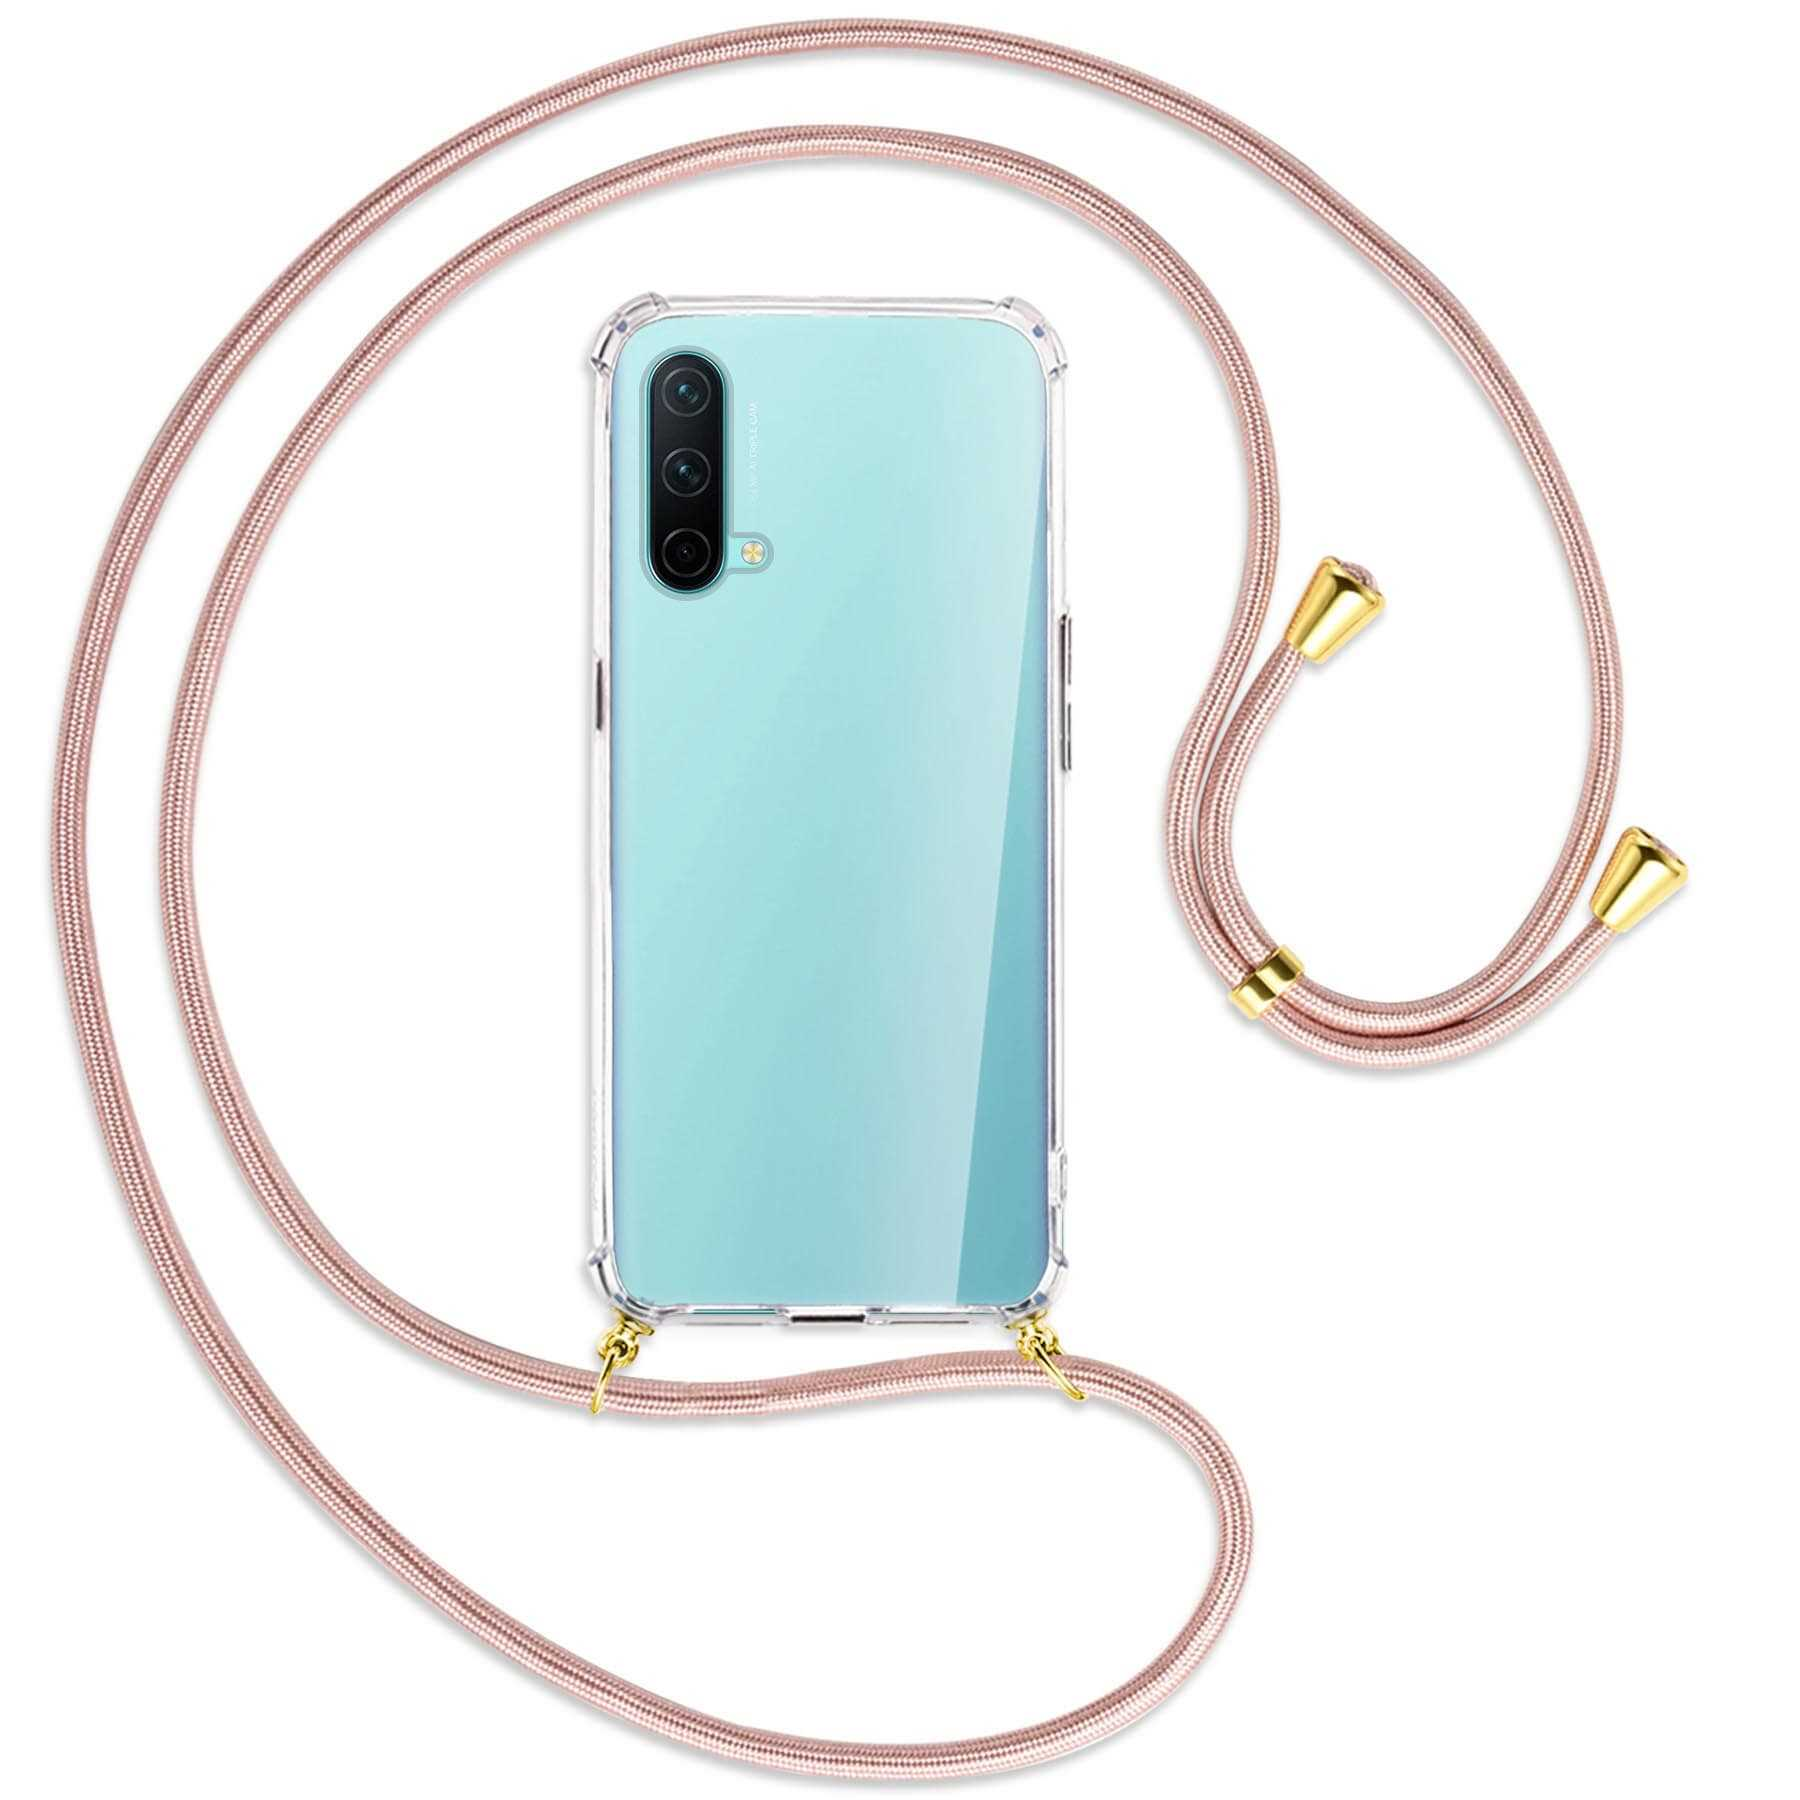 MTB mit Core Rosegold 5G, Kordel, CE Nord Backcover, ENERGY Gold Edition Umhänge-Hülle / OnePlus, MORE